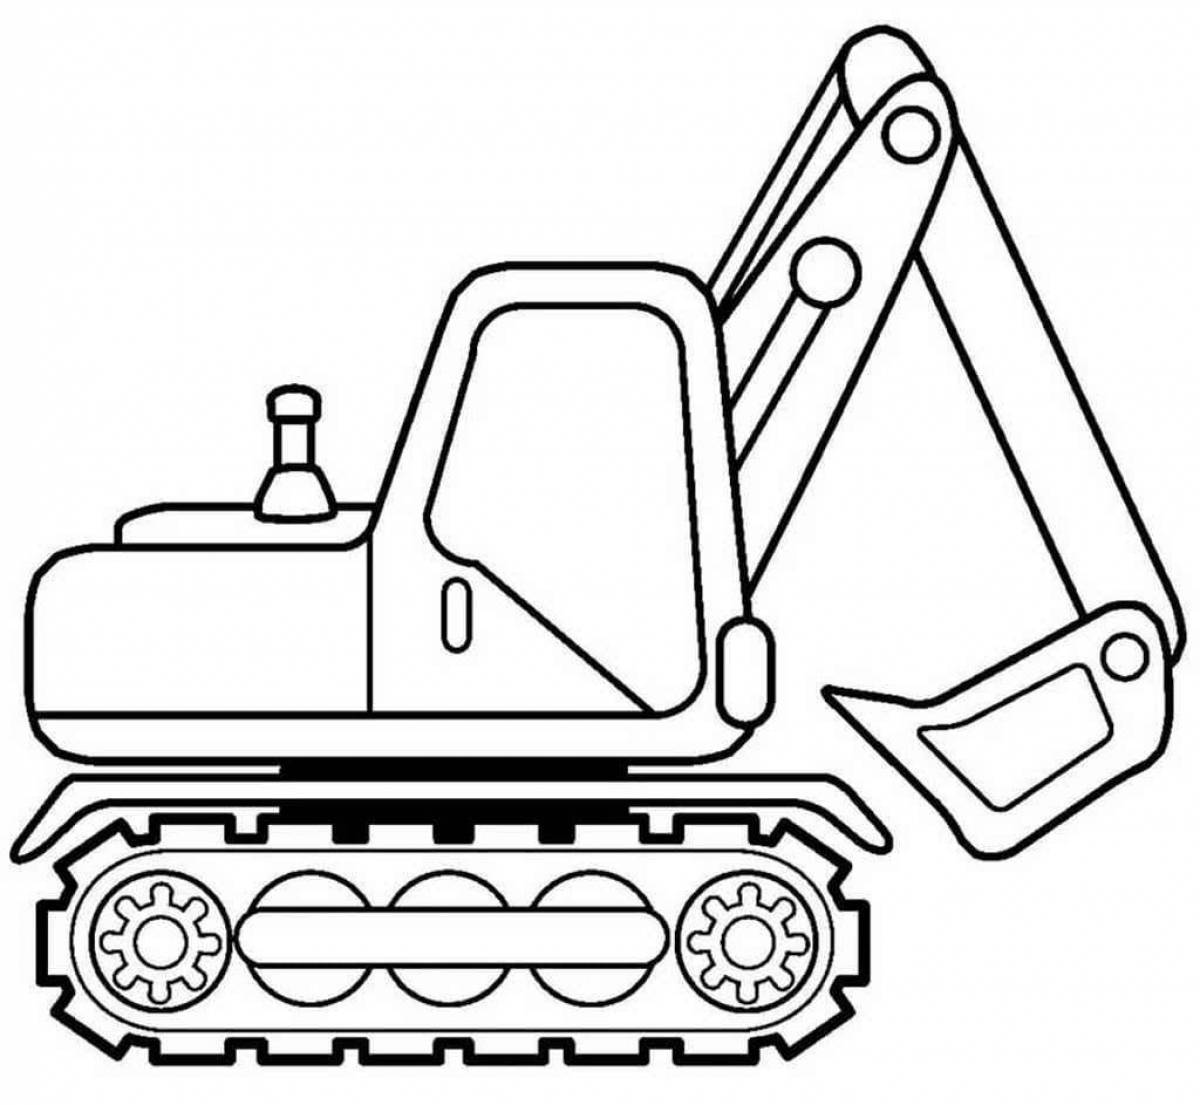 Coloring excavator for the little ones